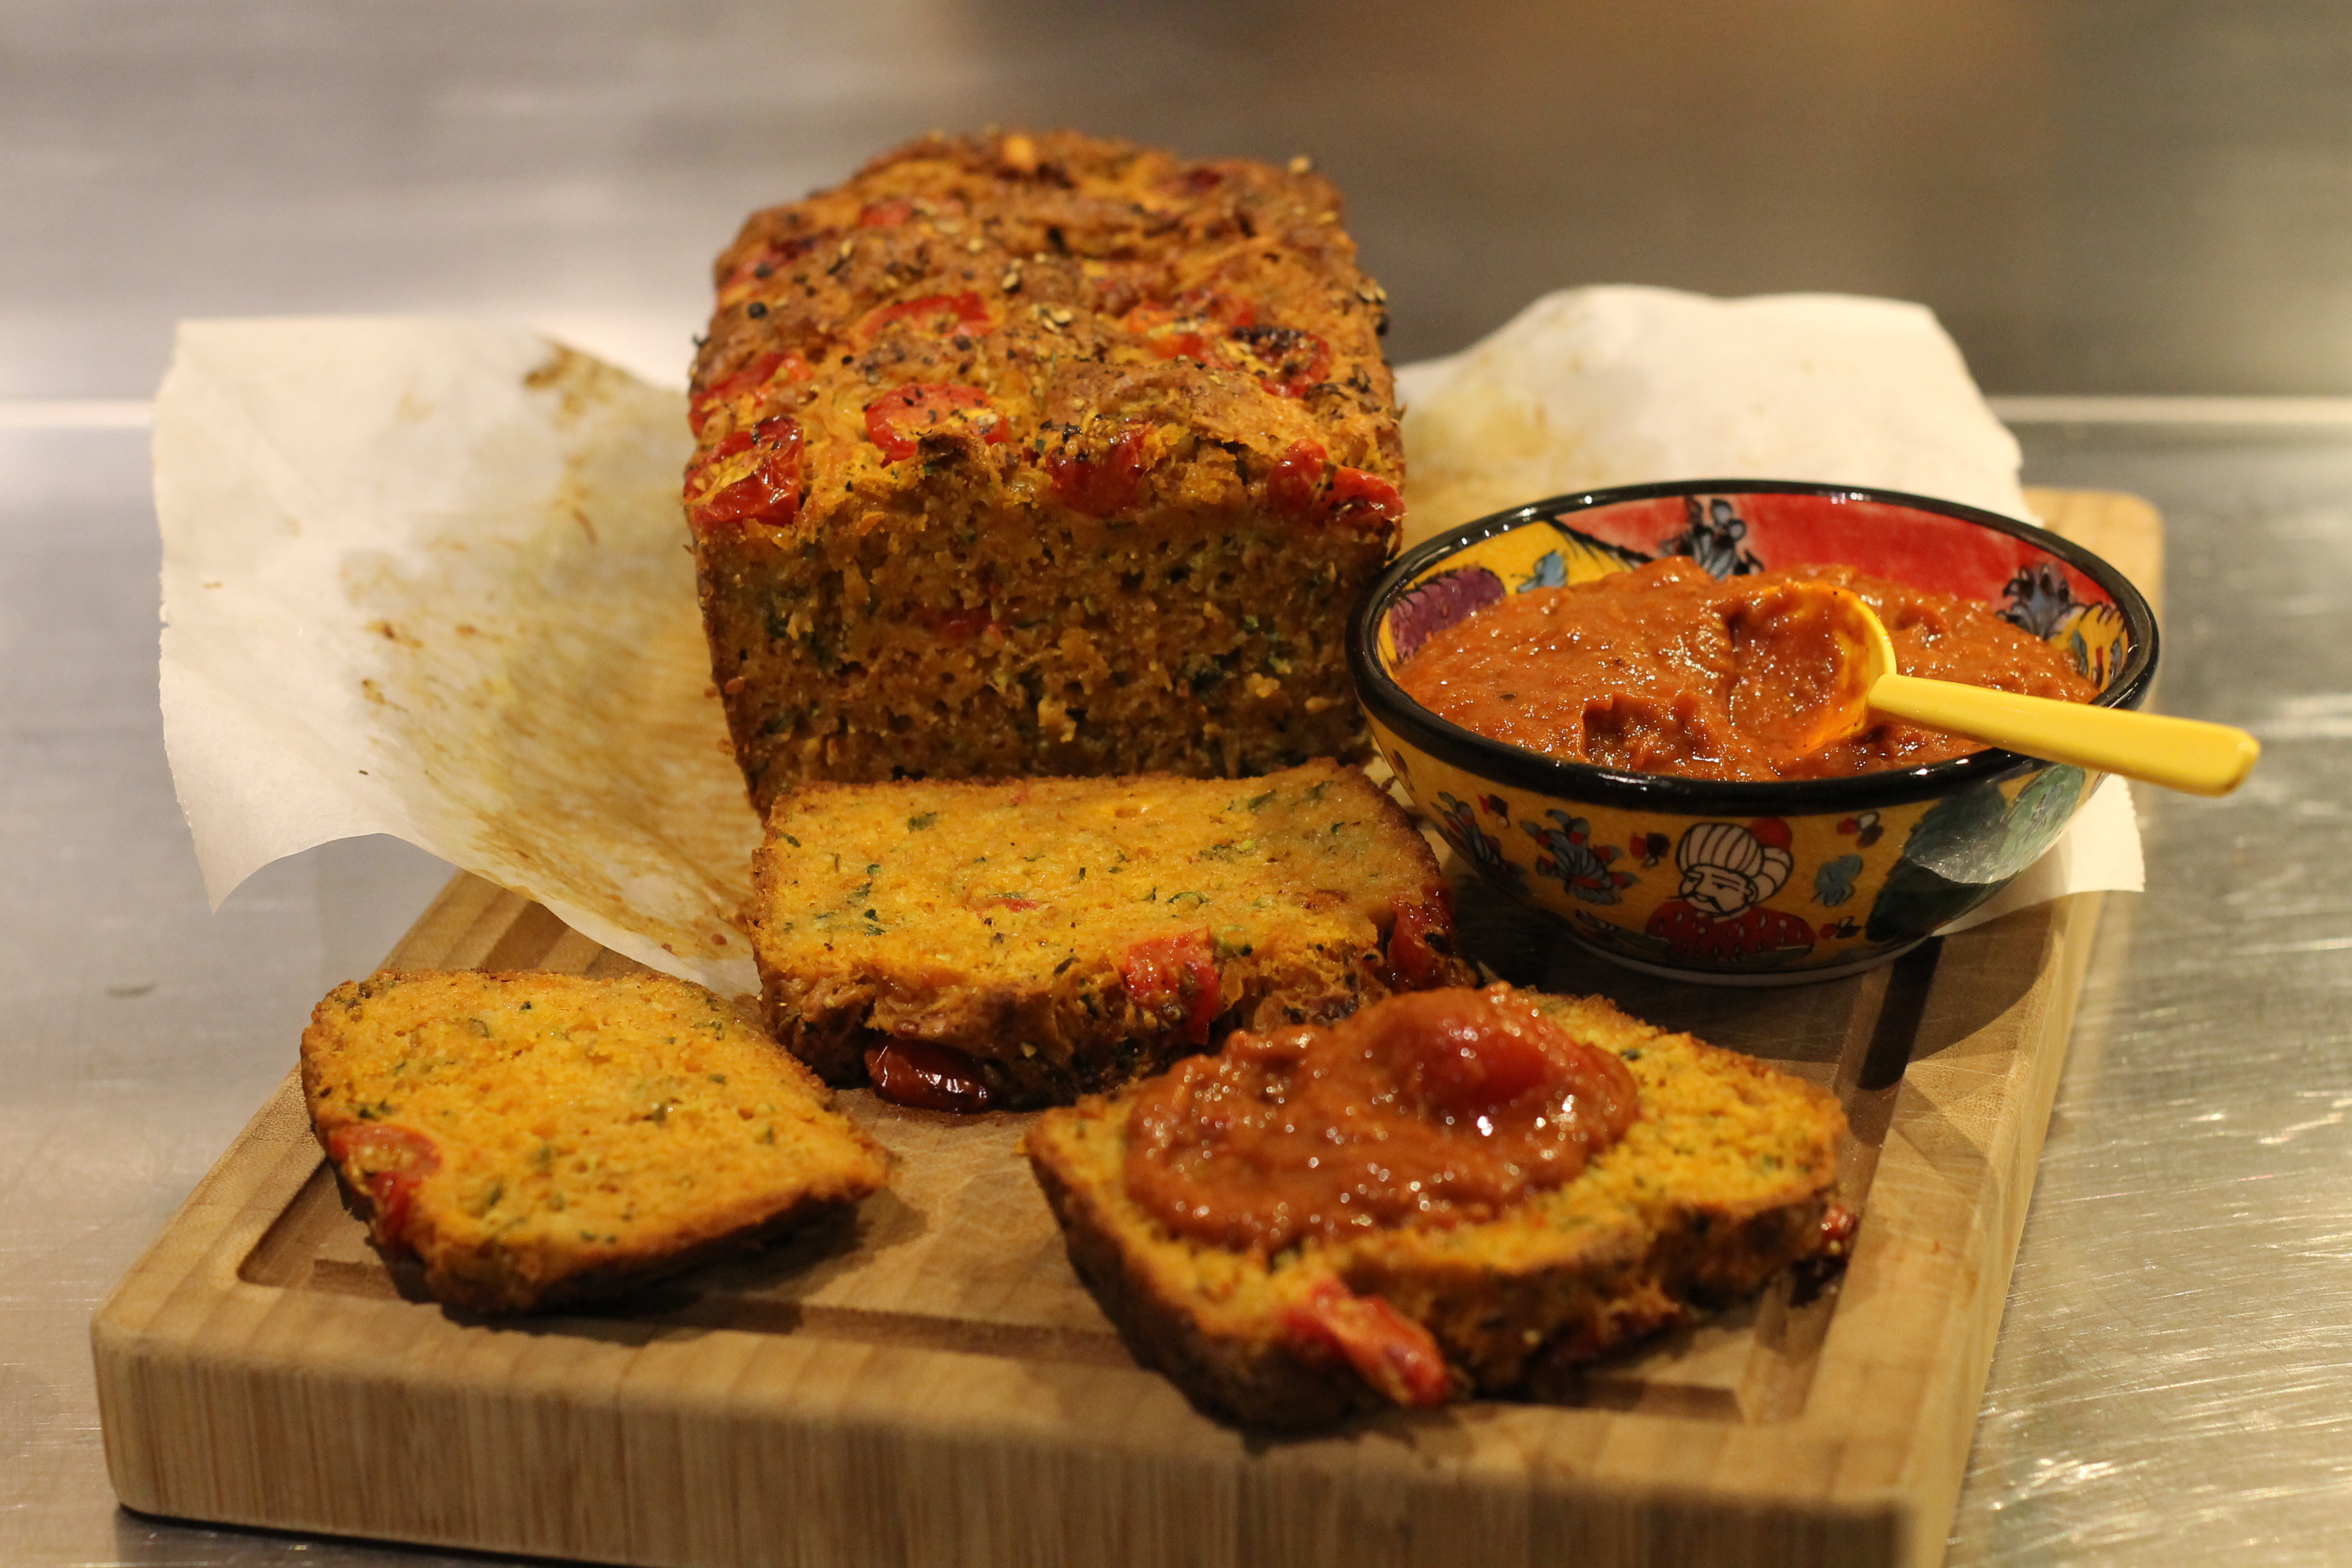 The Ultimate vegetable loaf – Tomato and Zucchini loaf with spiced tomato chutney